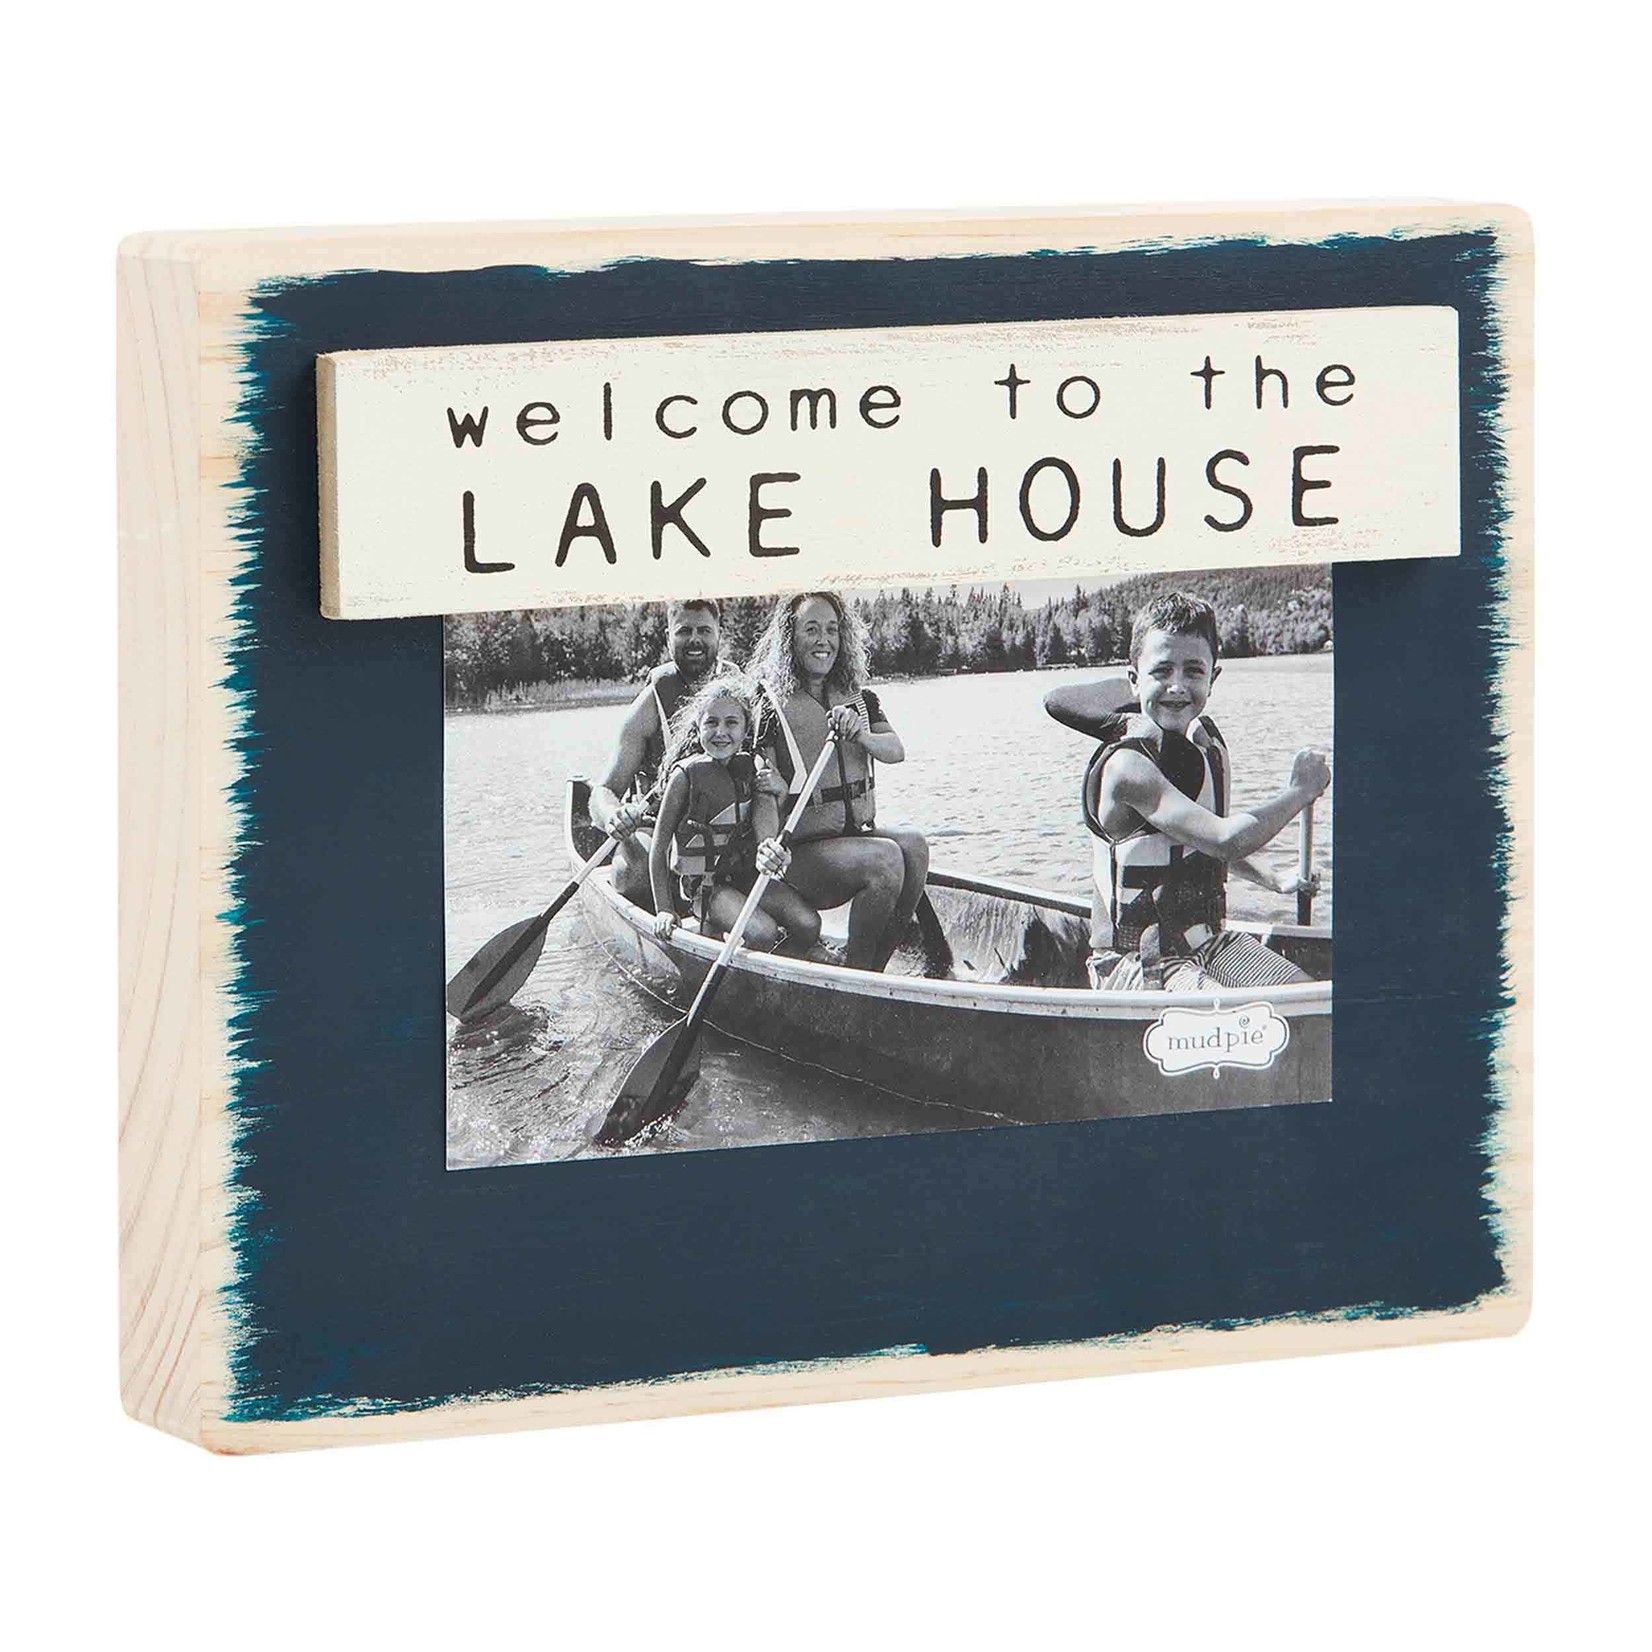 Mud Pie Mud Pie - Welcome to the lake house Frame